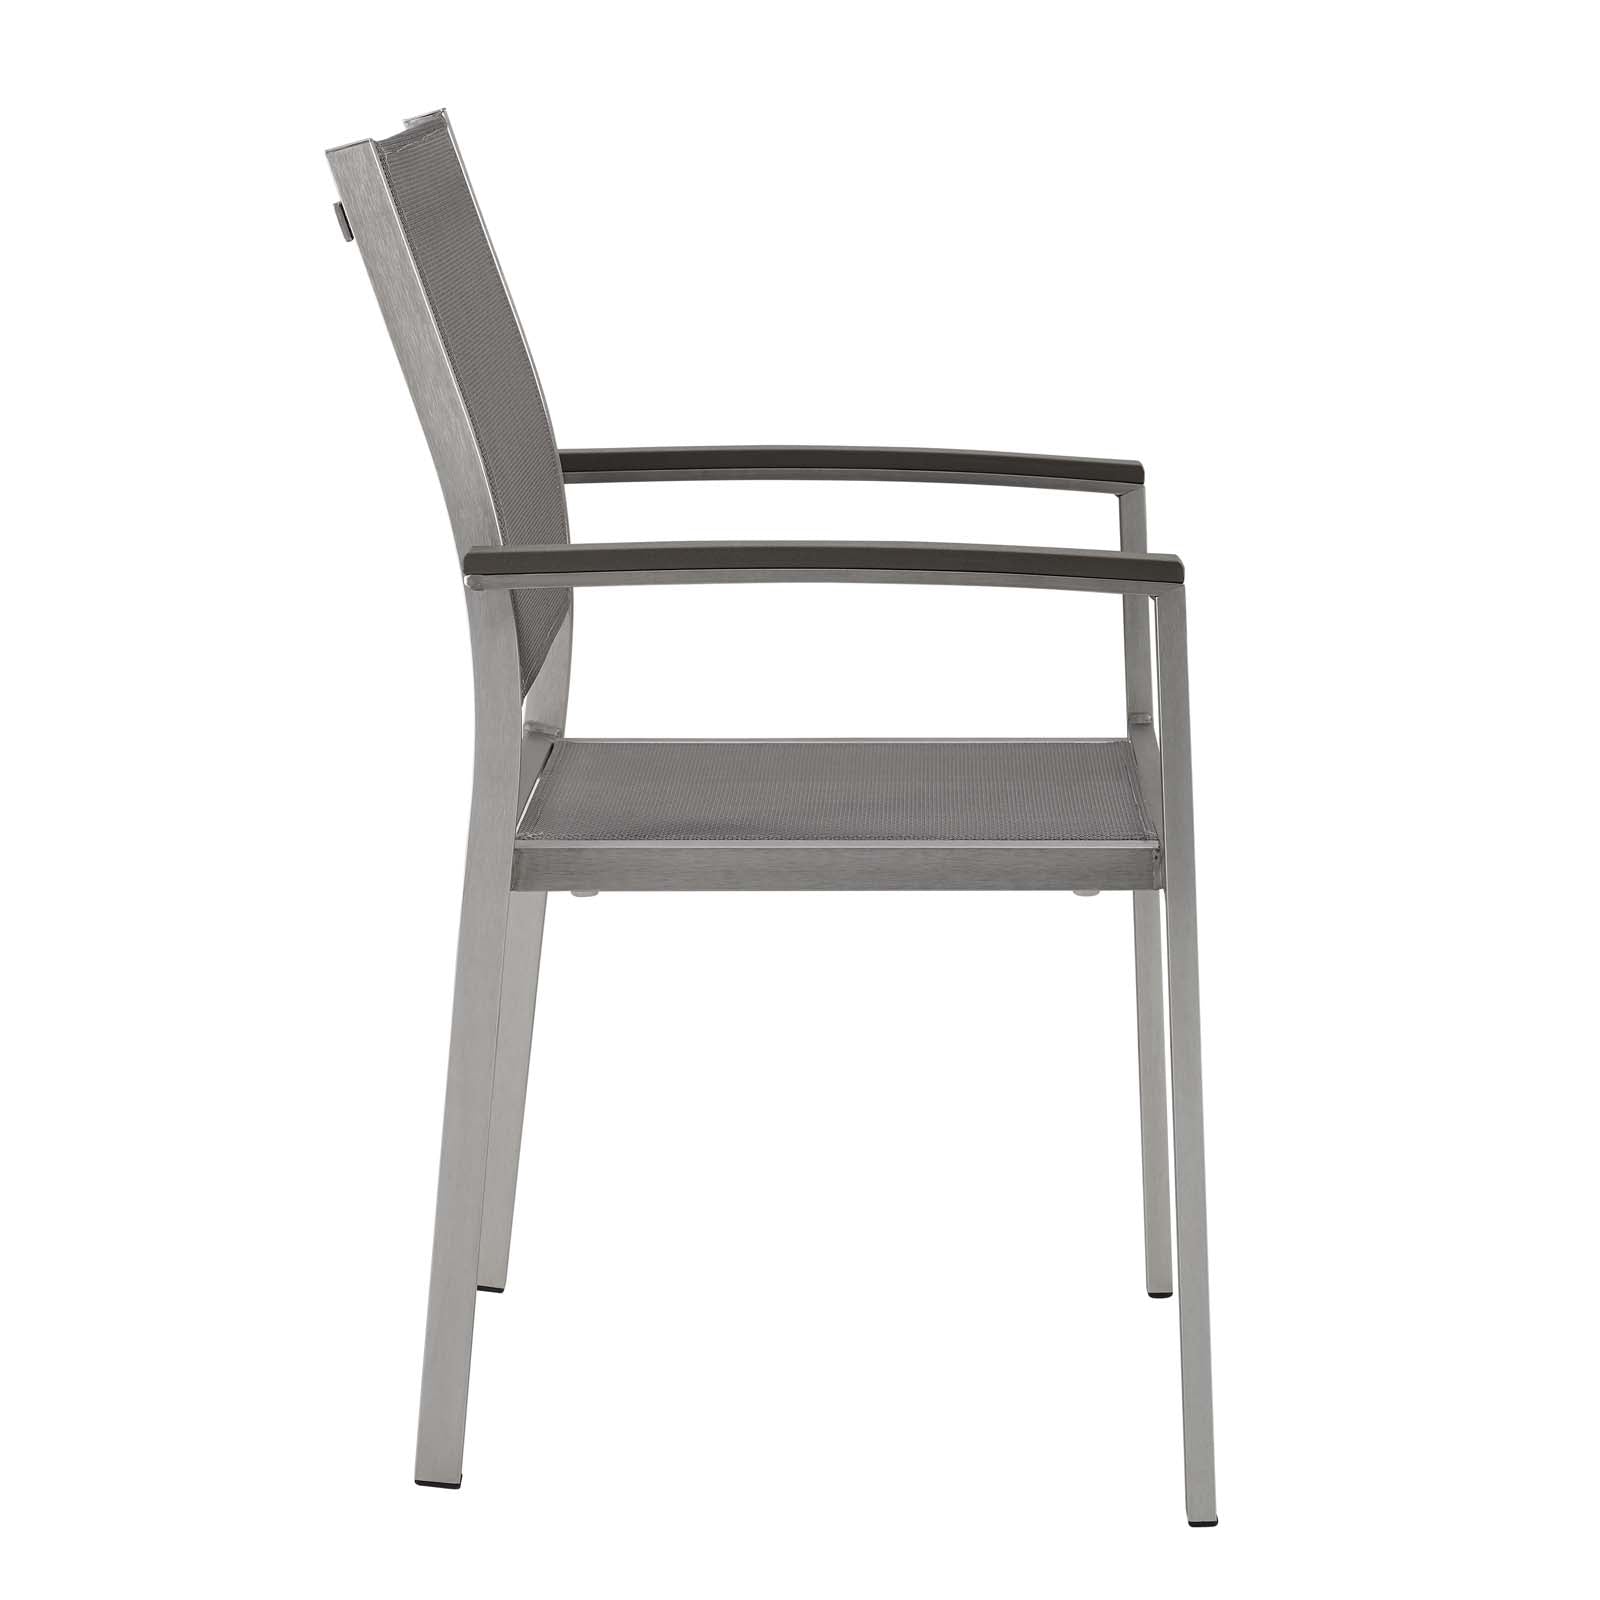 Modway Outdoor Dining Chairs - Shore Dining Chair Outdoor Patio Aluminum Set of 2 Silver Gray